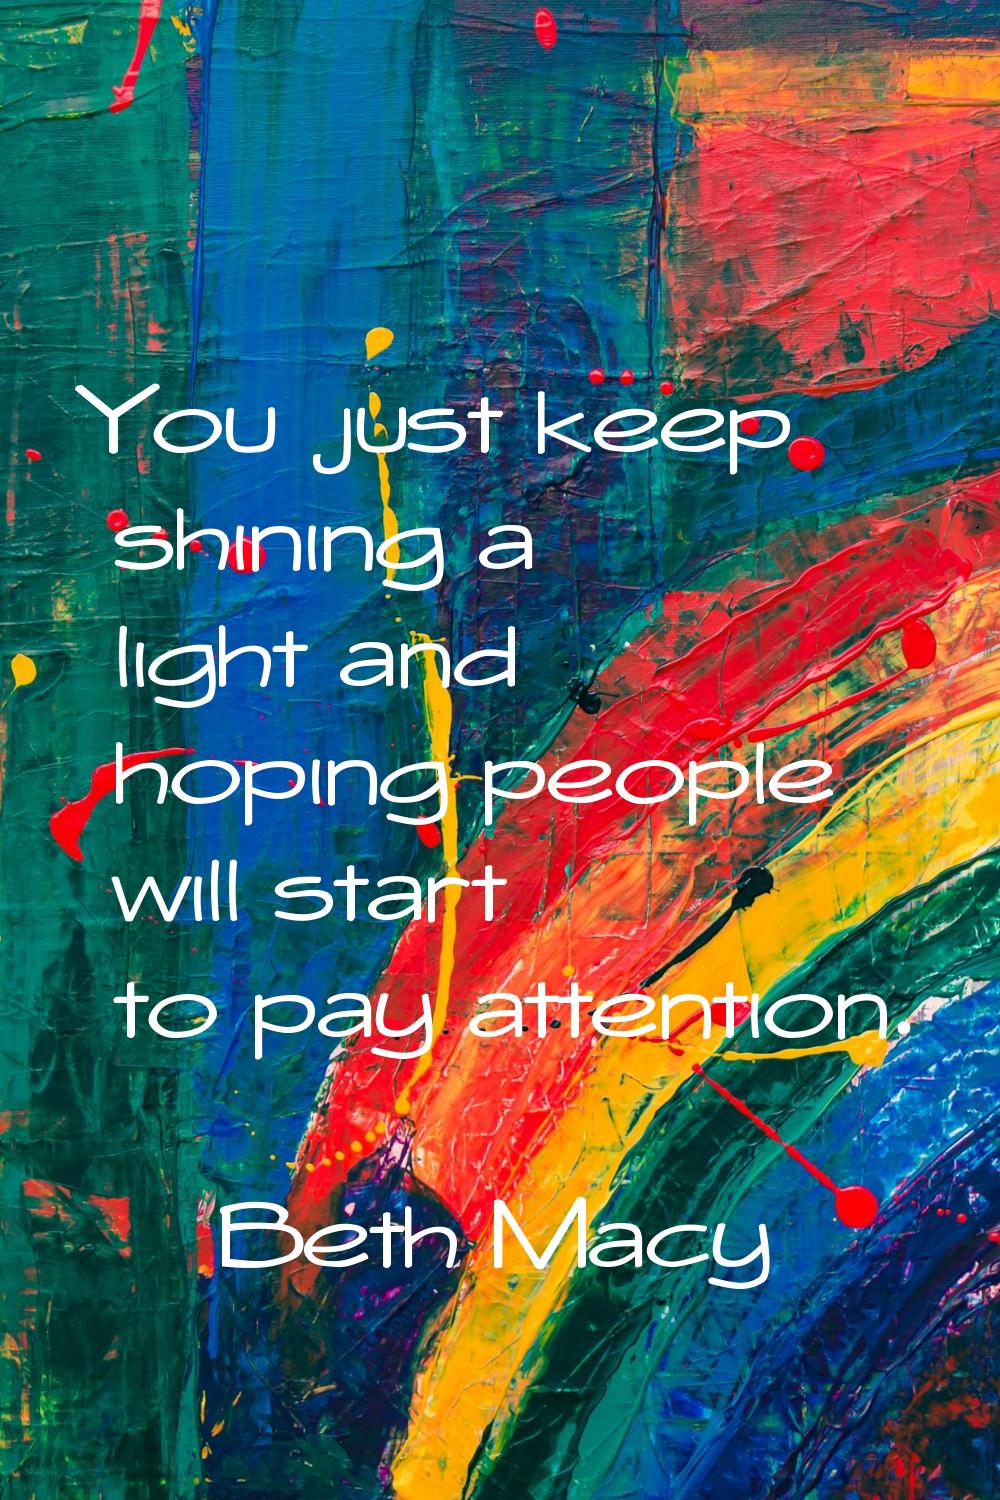 You just keep shining a light and hoping people will start to pay attention.